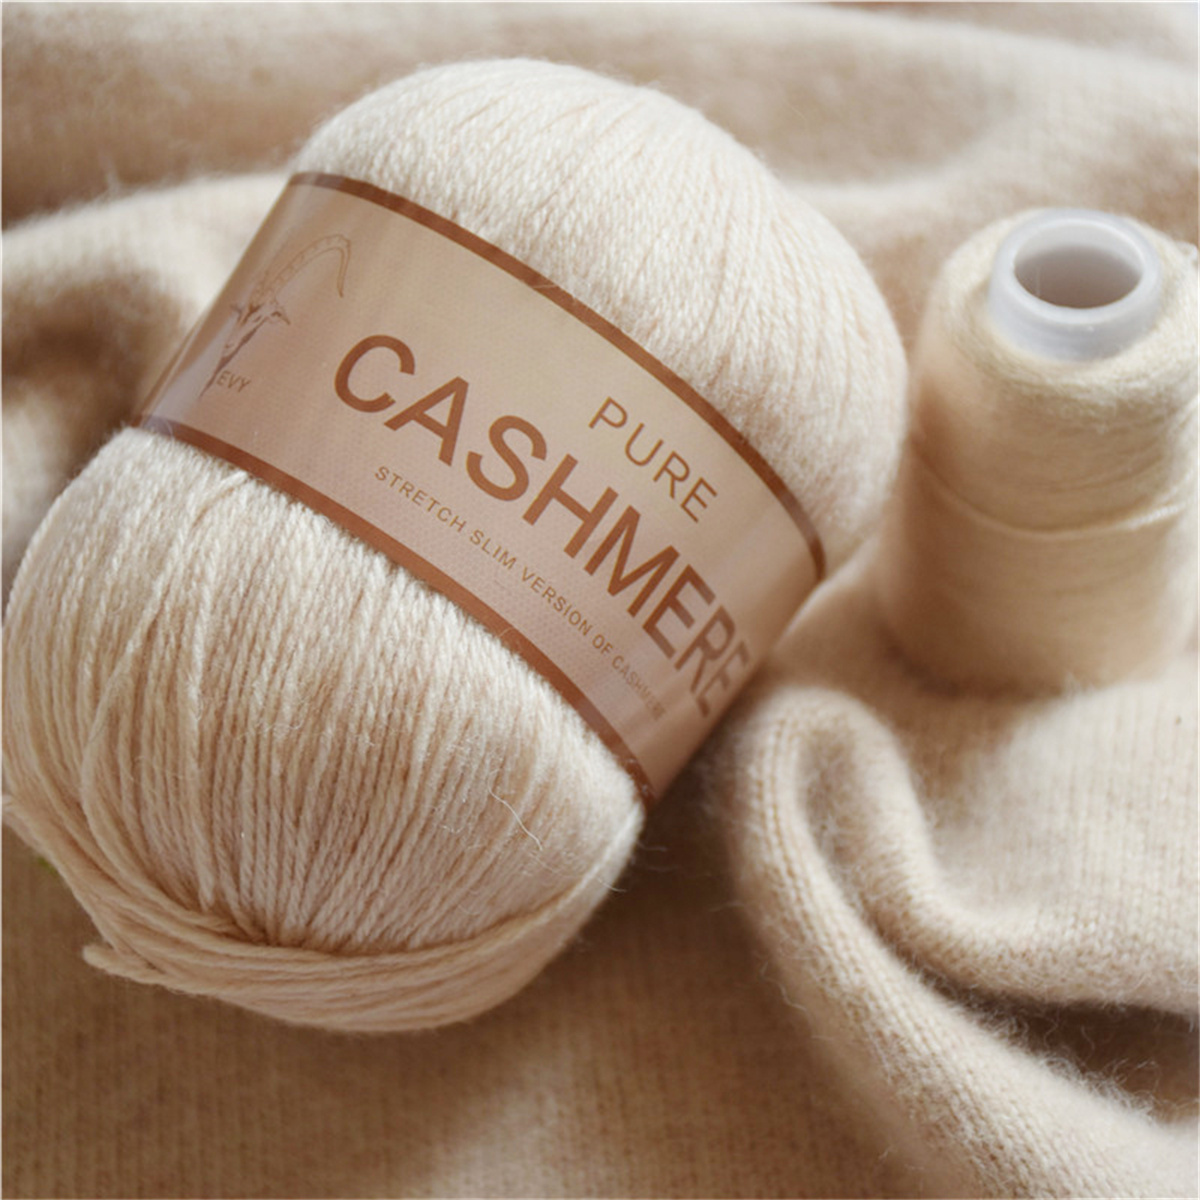 4 Rolls Dyed Soft & Fluffy Faux Cashmere Yarn For Crocheting Warm Sweater  And Hat In Winter Season